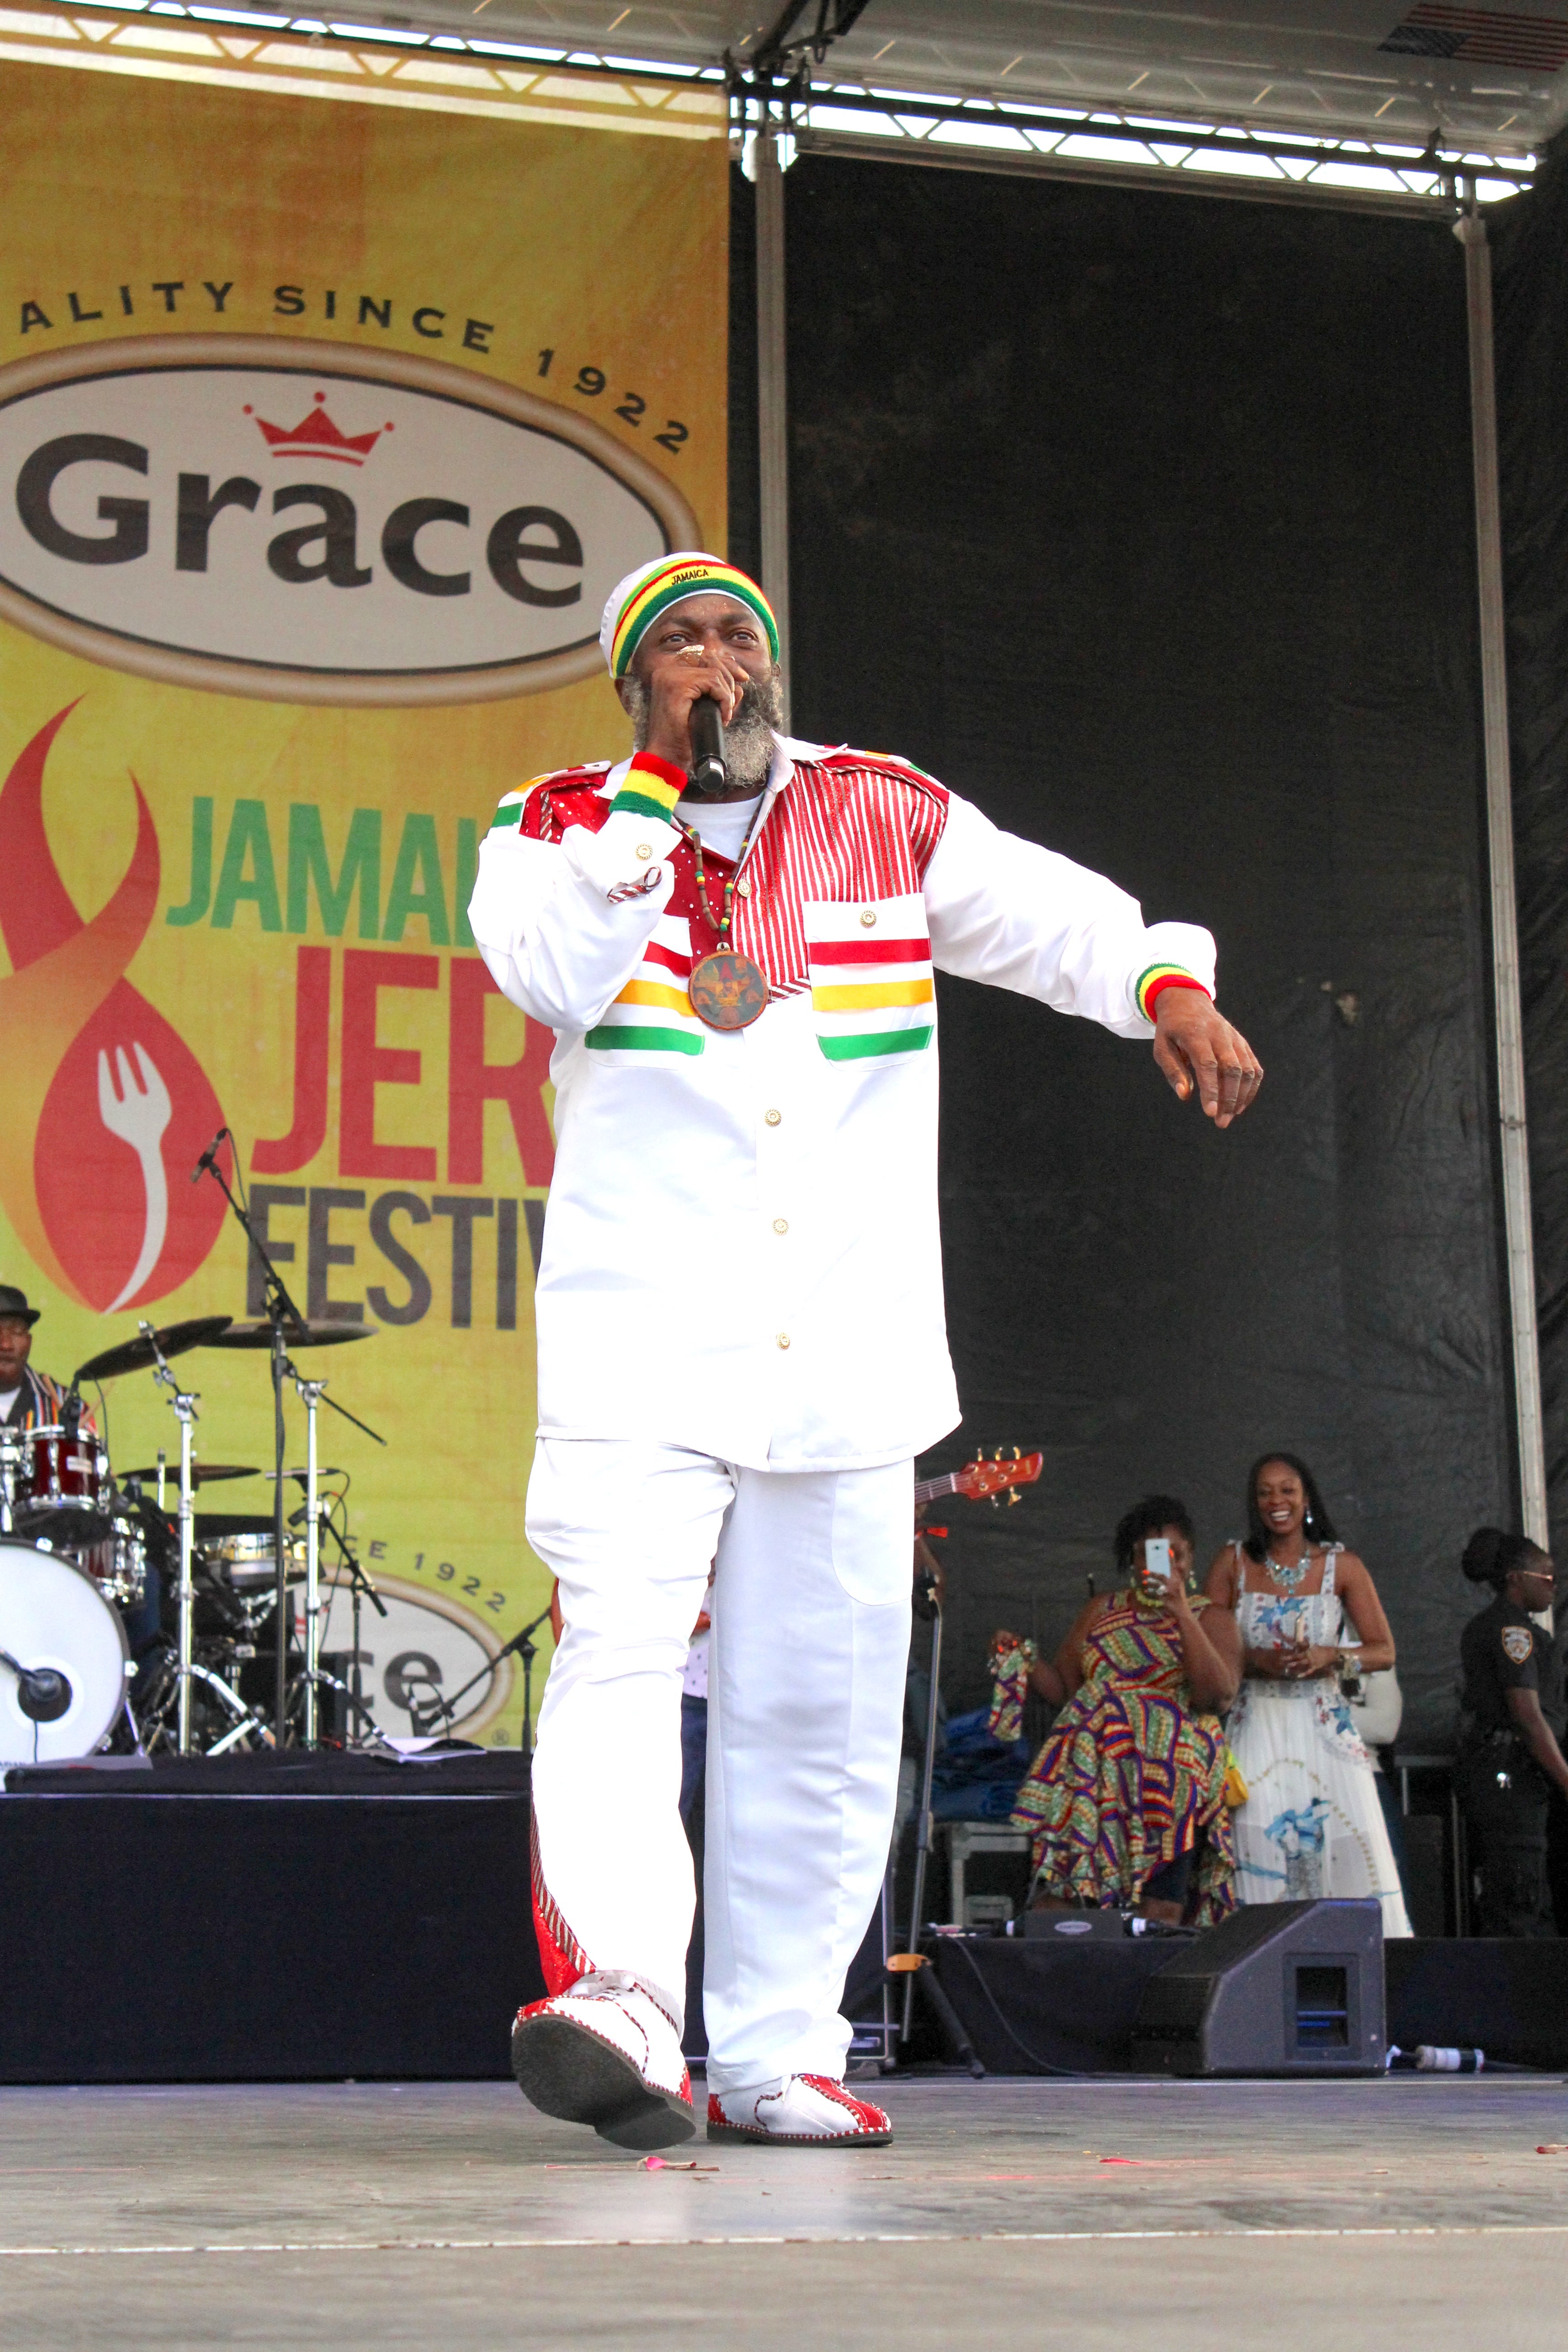 Grace Jerk Festival Brings Fete, Fine Fare and Flair to its Annual Family Affair